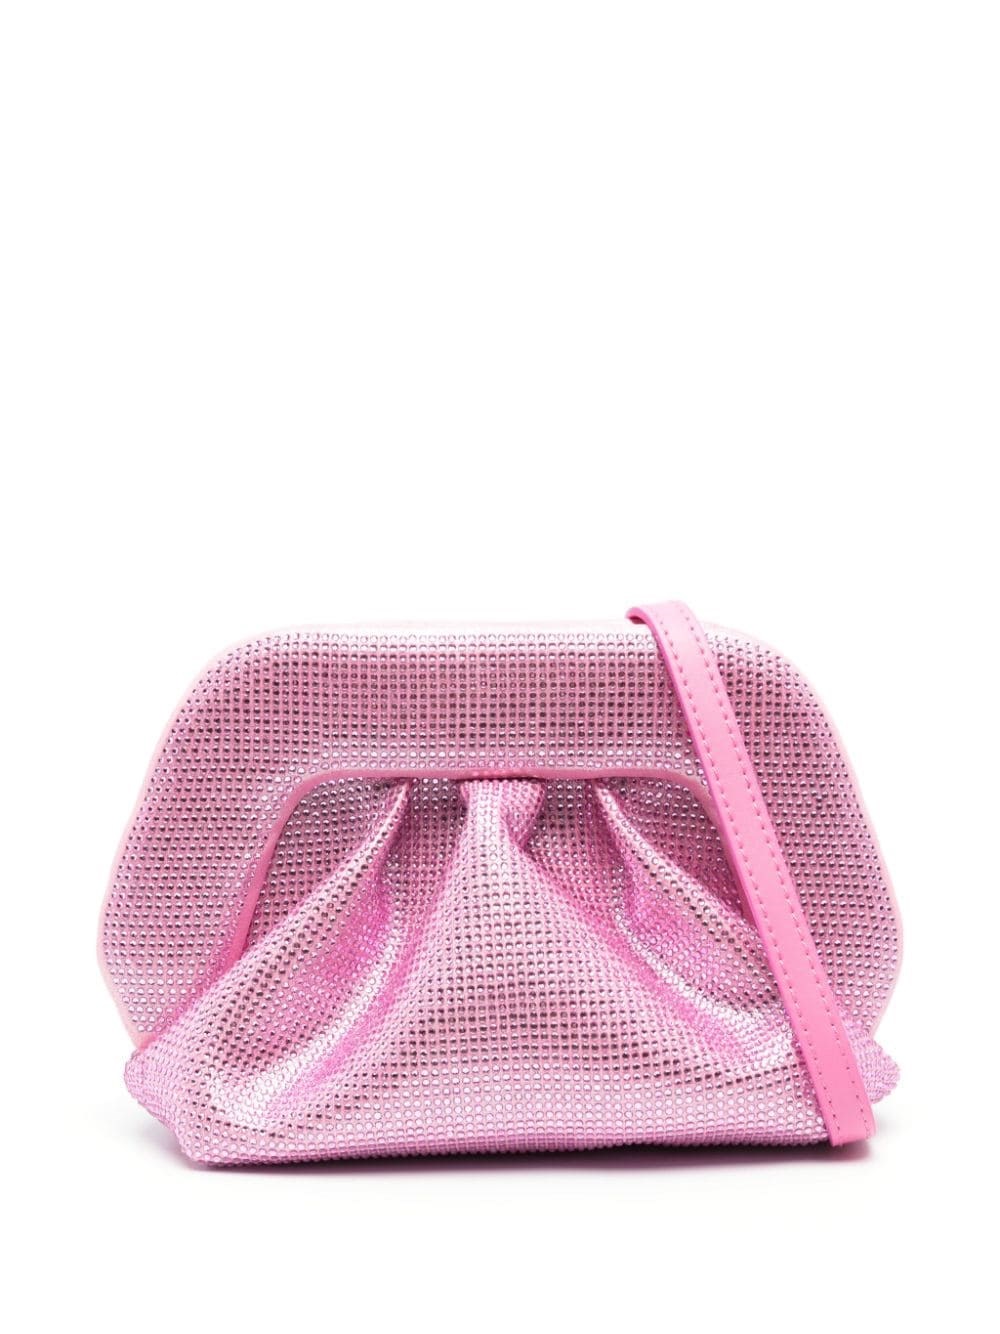 Themoire' Gea Clutch Bag Embellished With Rhinestones In Pink & Purple